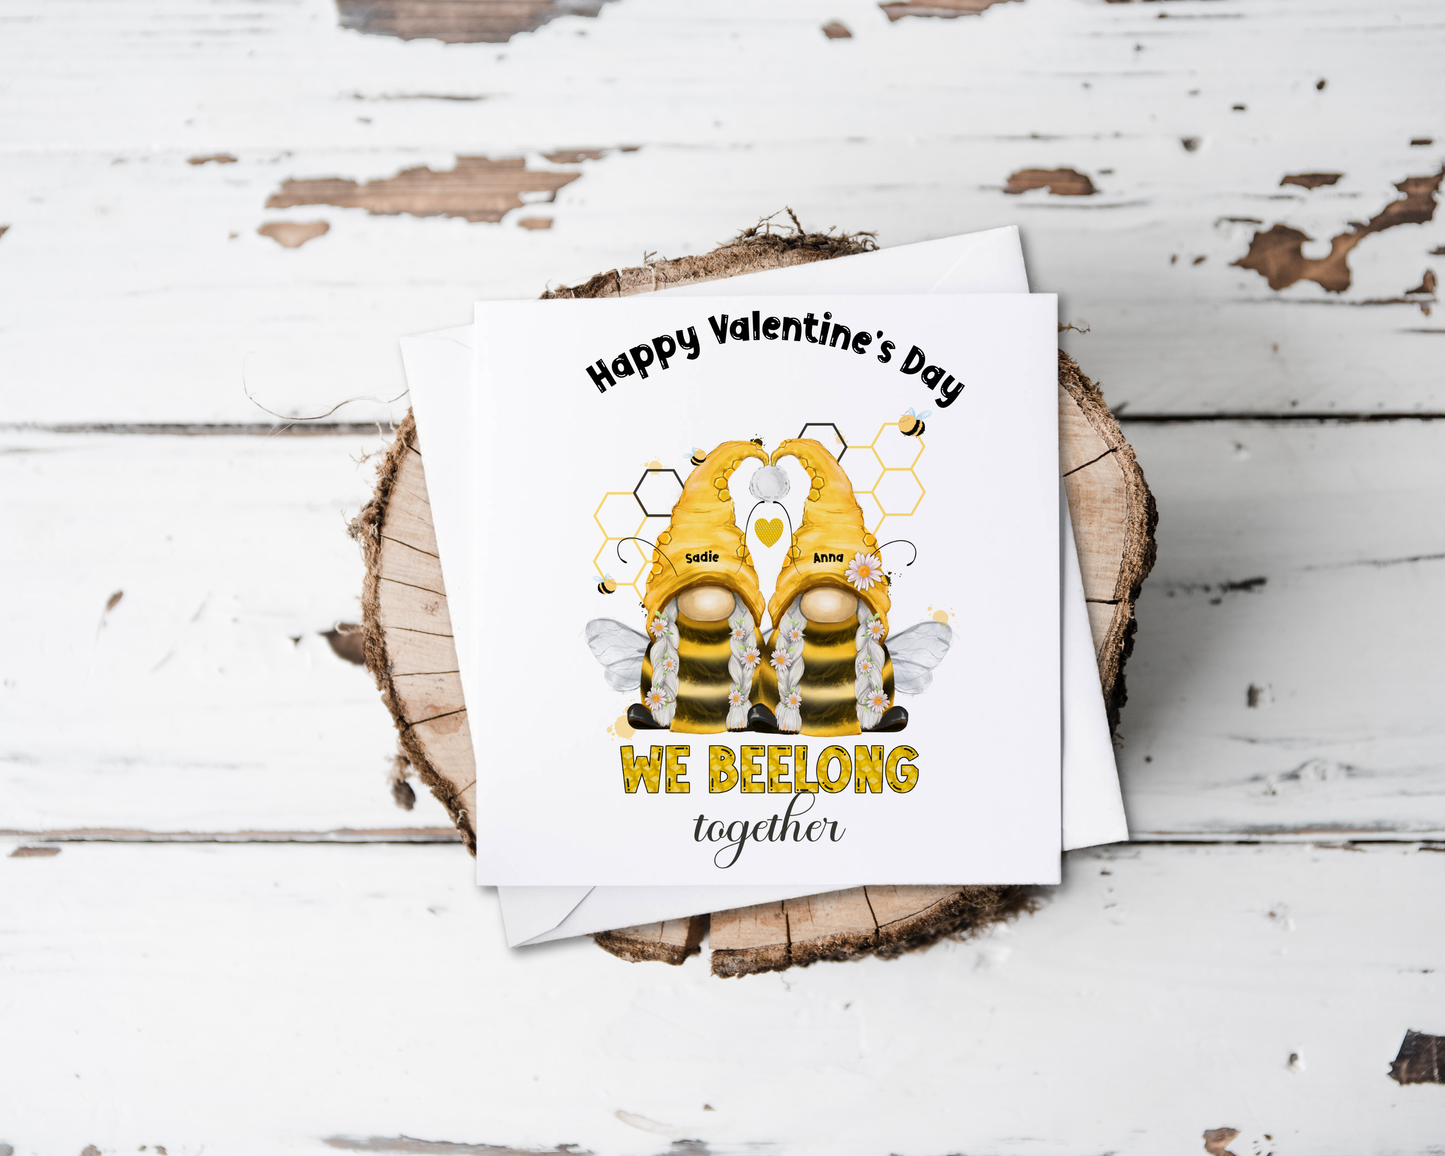 Valentine card with a cute bee lesbian couple and can be personalised, the card says we beelong together.